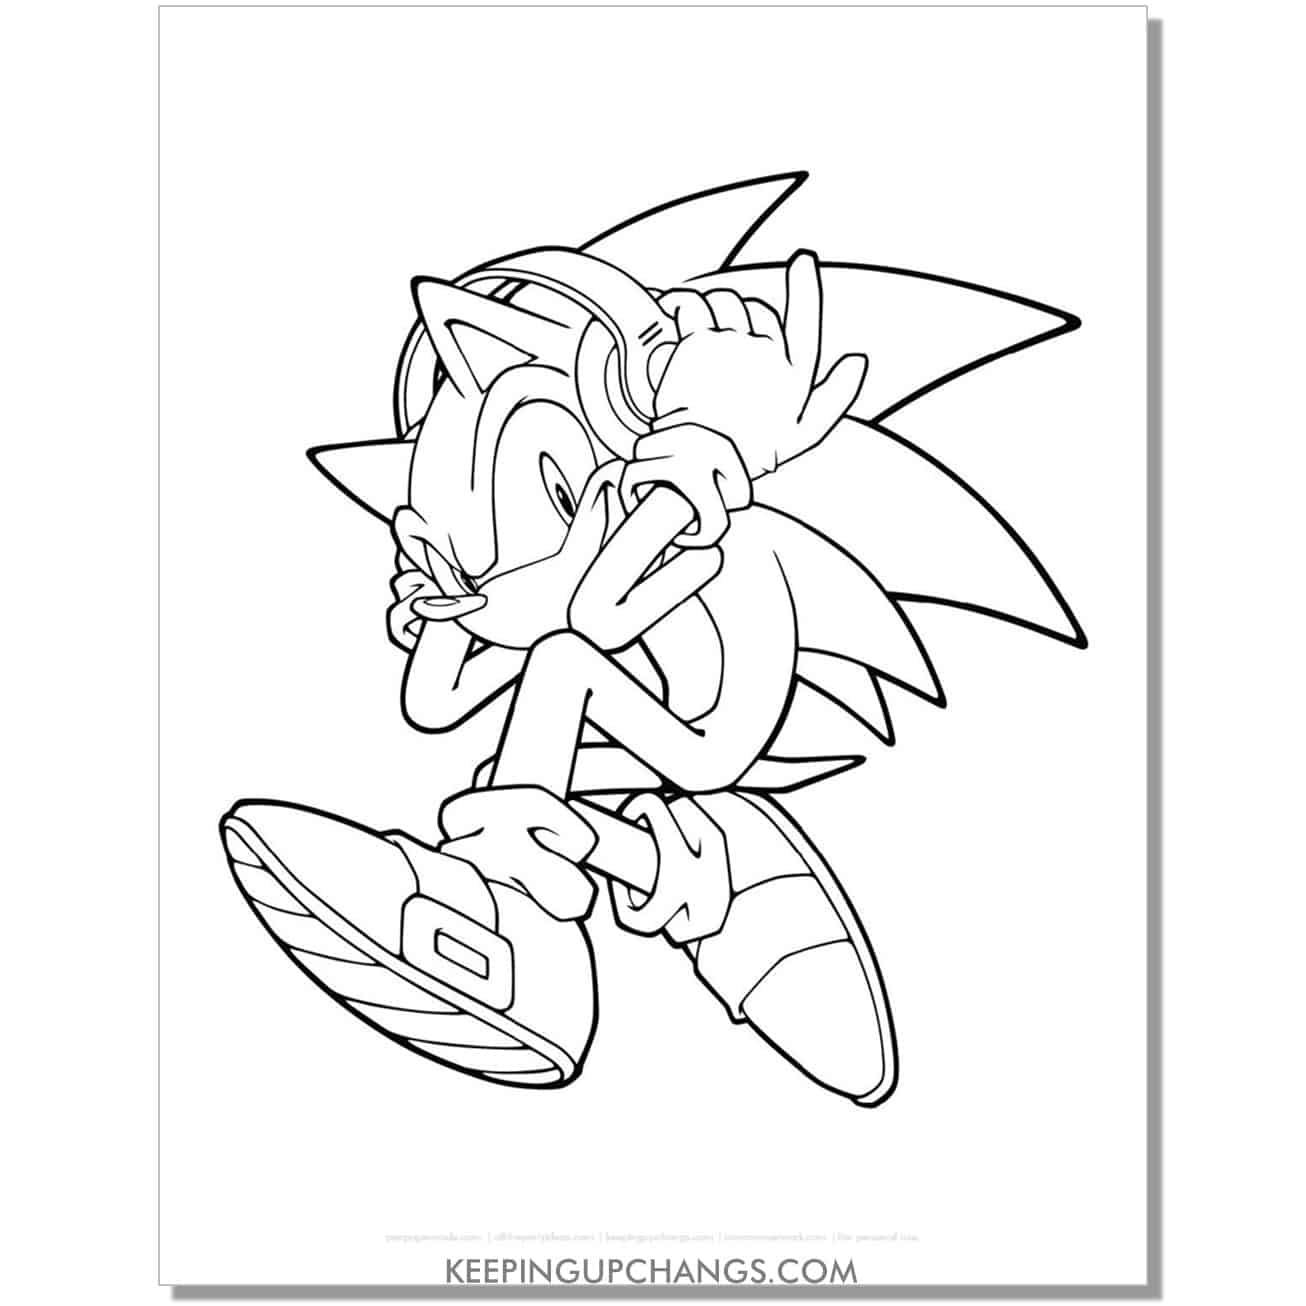 sonic with headphones coloring page.